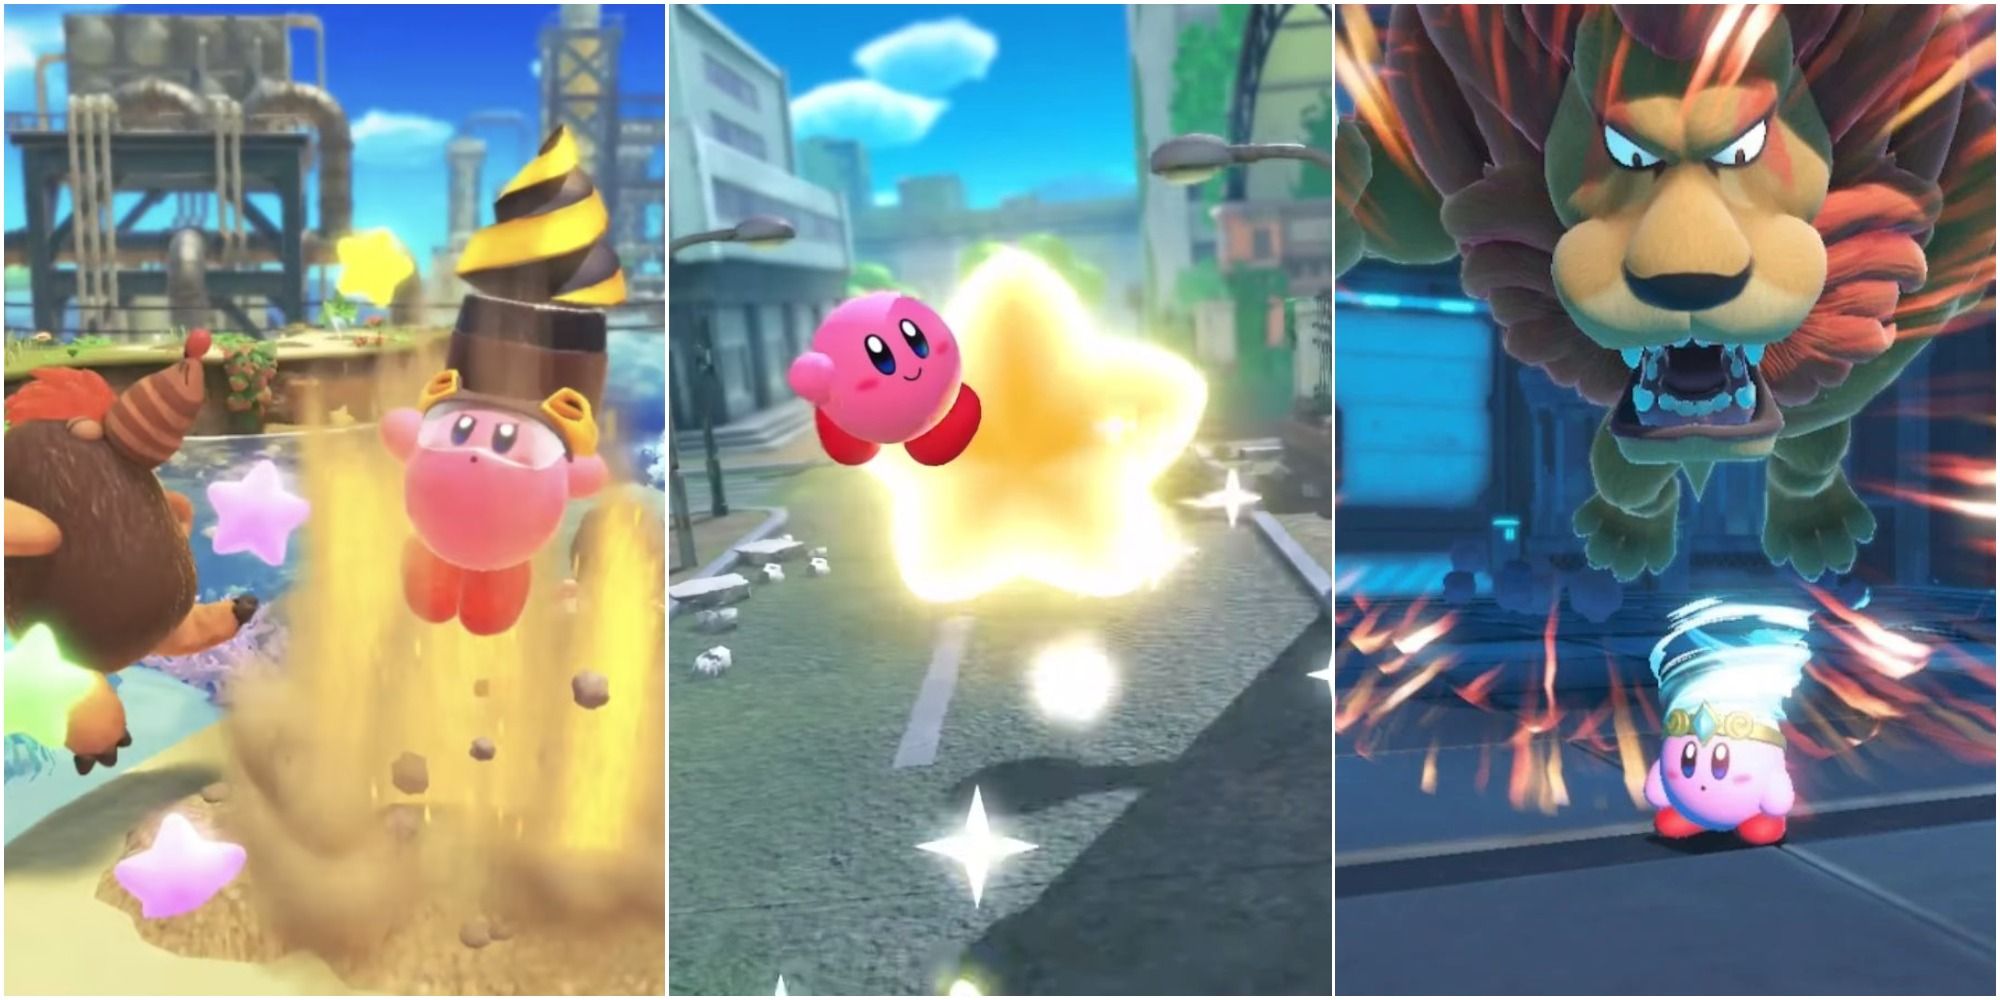 Kirby using his drill ability on a beach, kirby riding a start through a city, wind kirby being attacked by Leongar